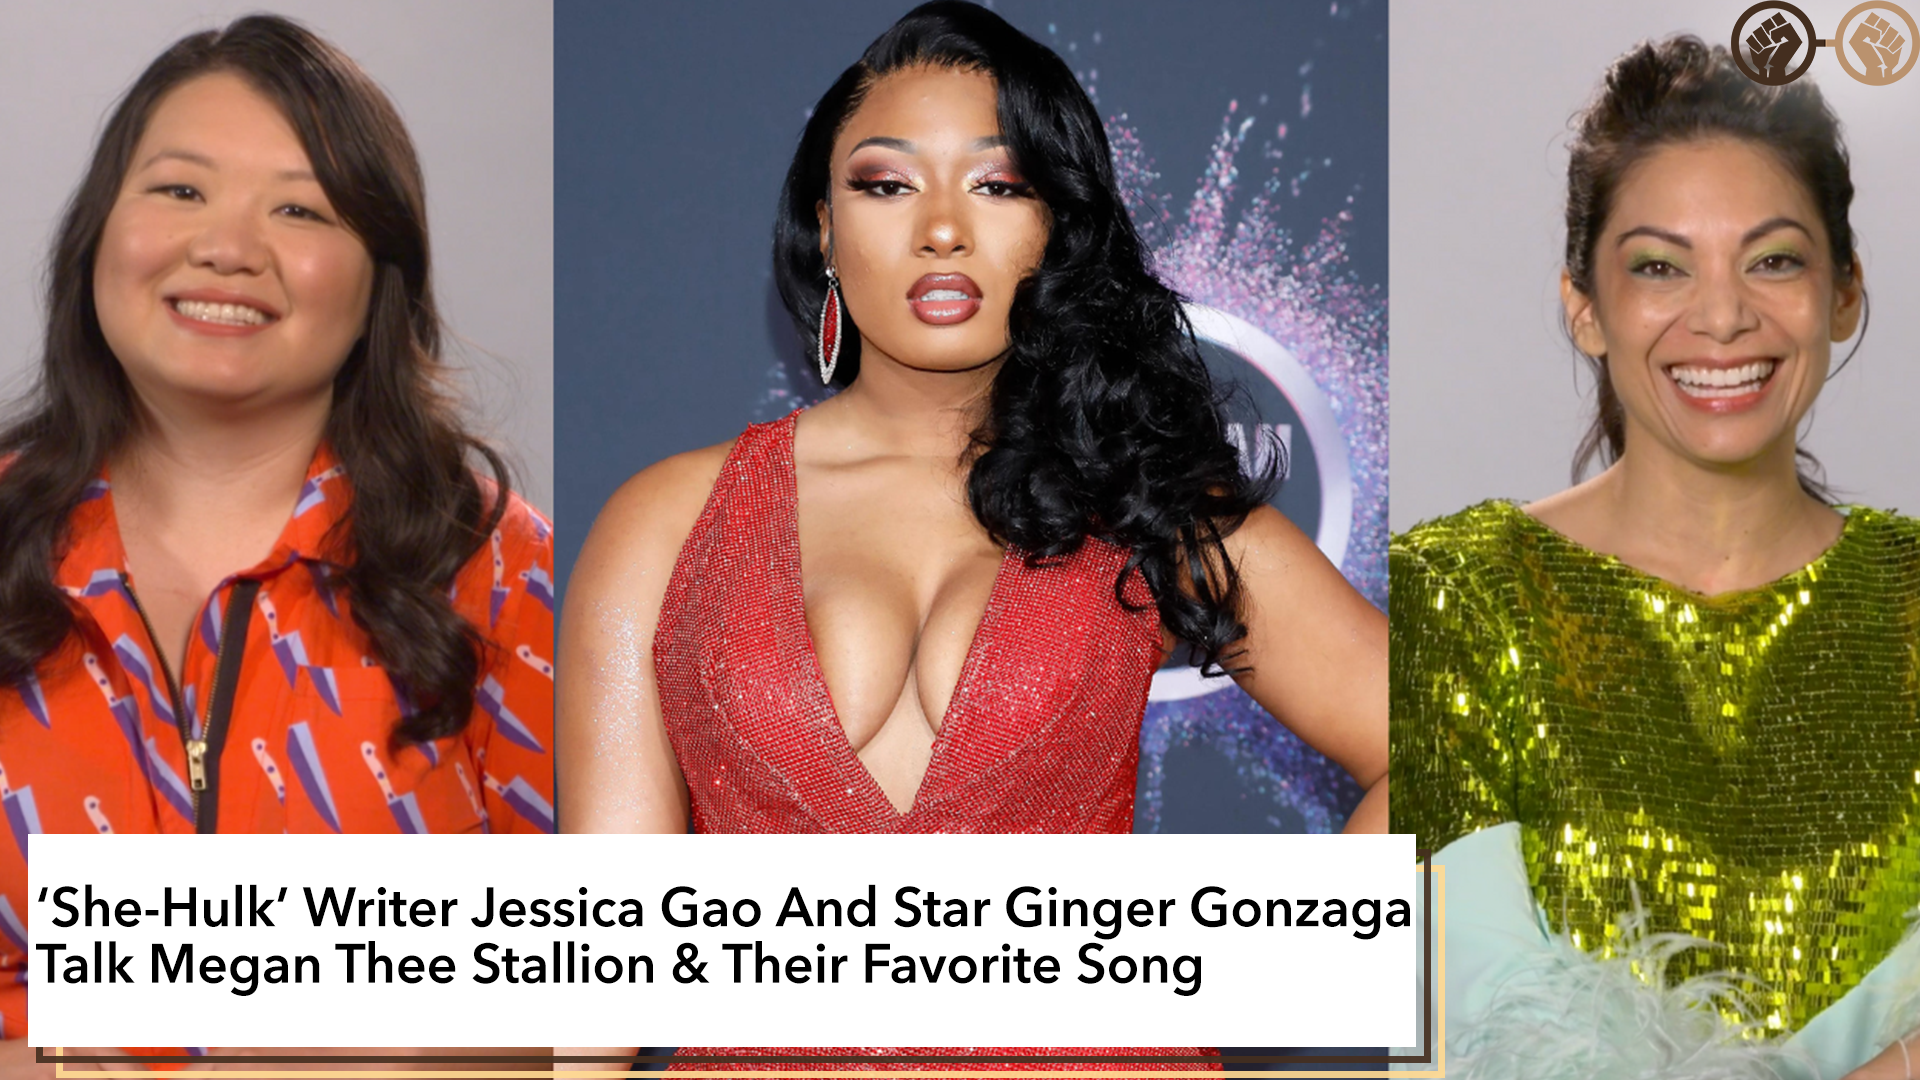 ‘She-Hulk’ Writer Jessica Gao And Star Ginger Gonzaga Talk Megan Thee Stallion & Their Favourite Song